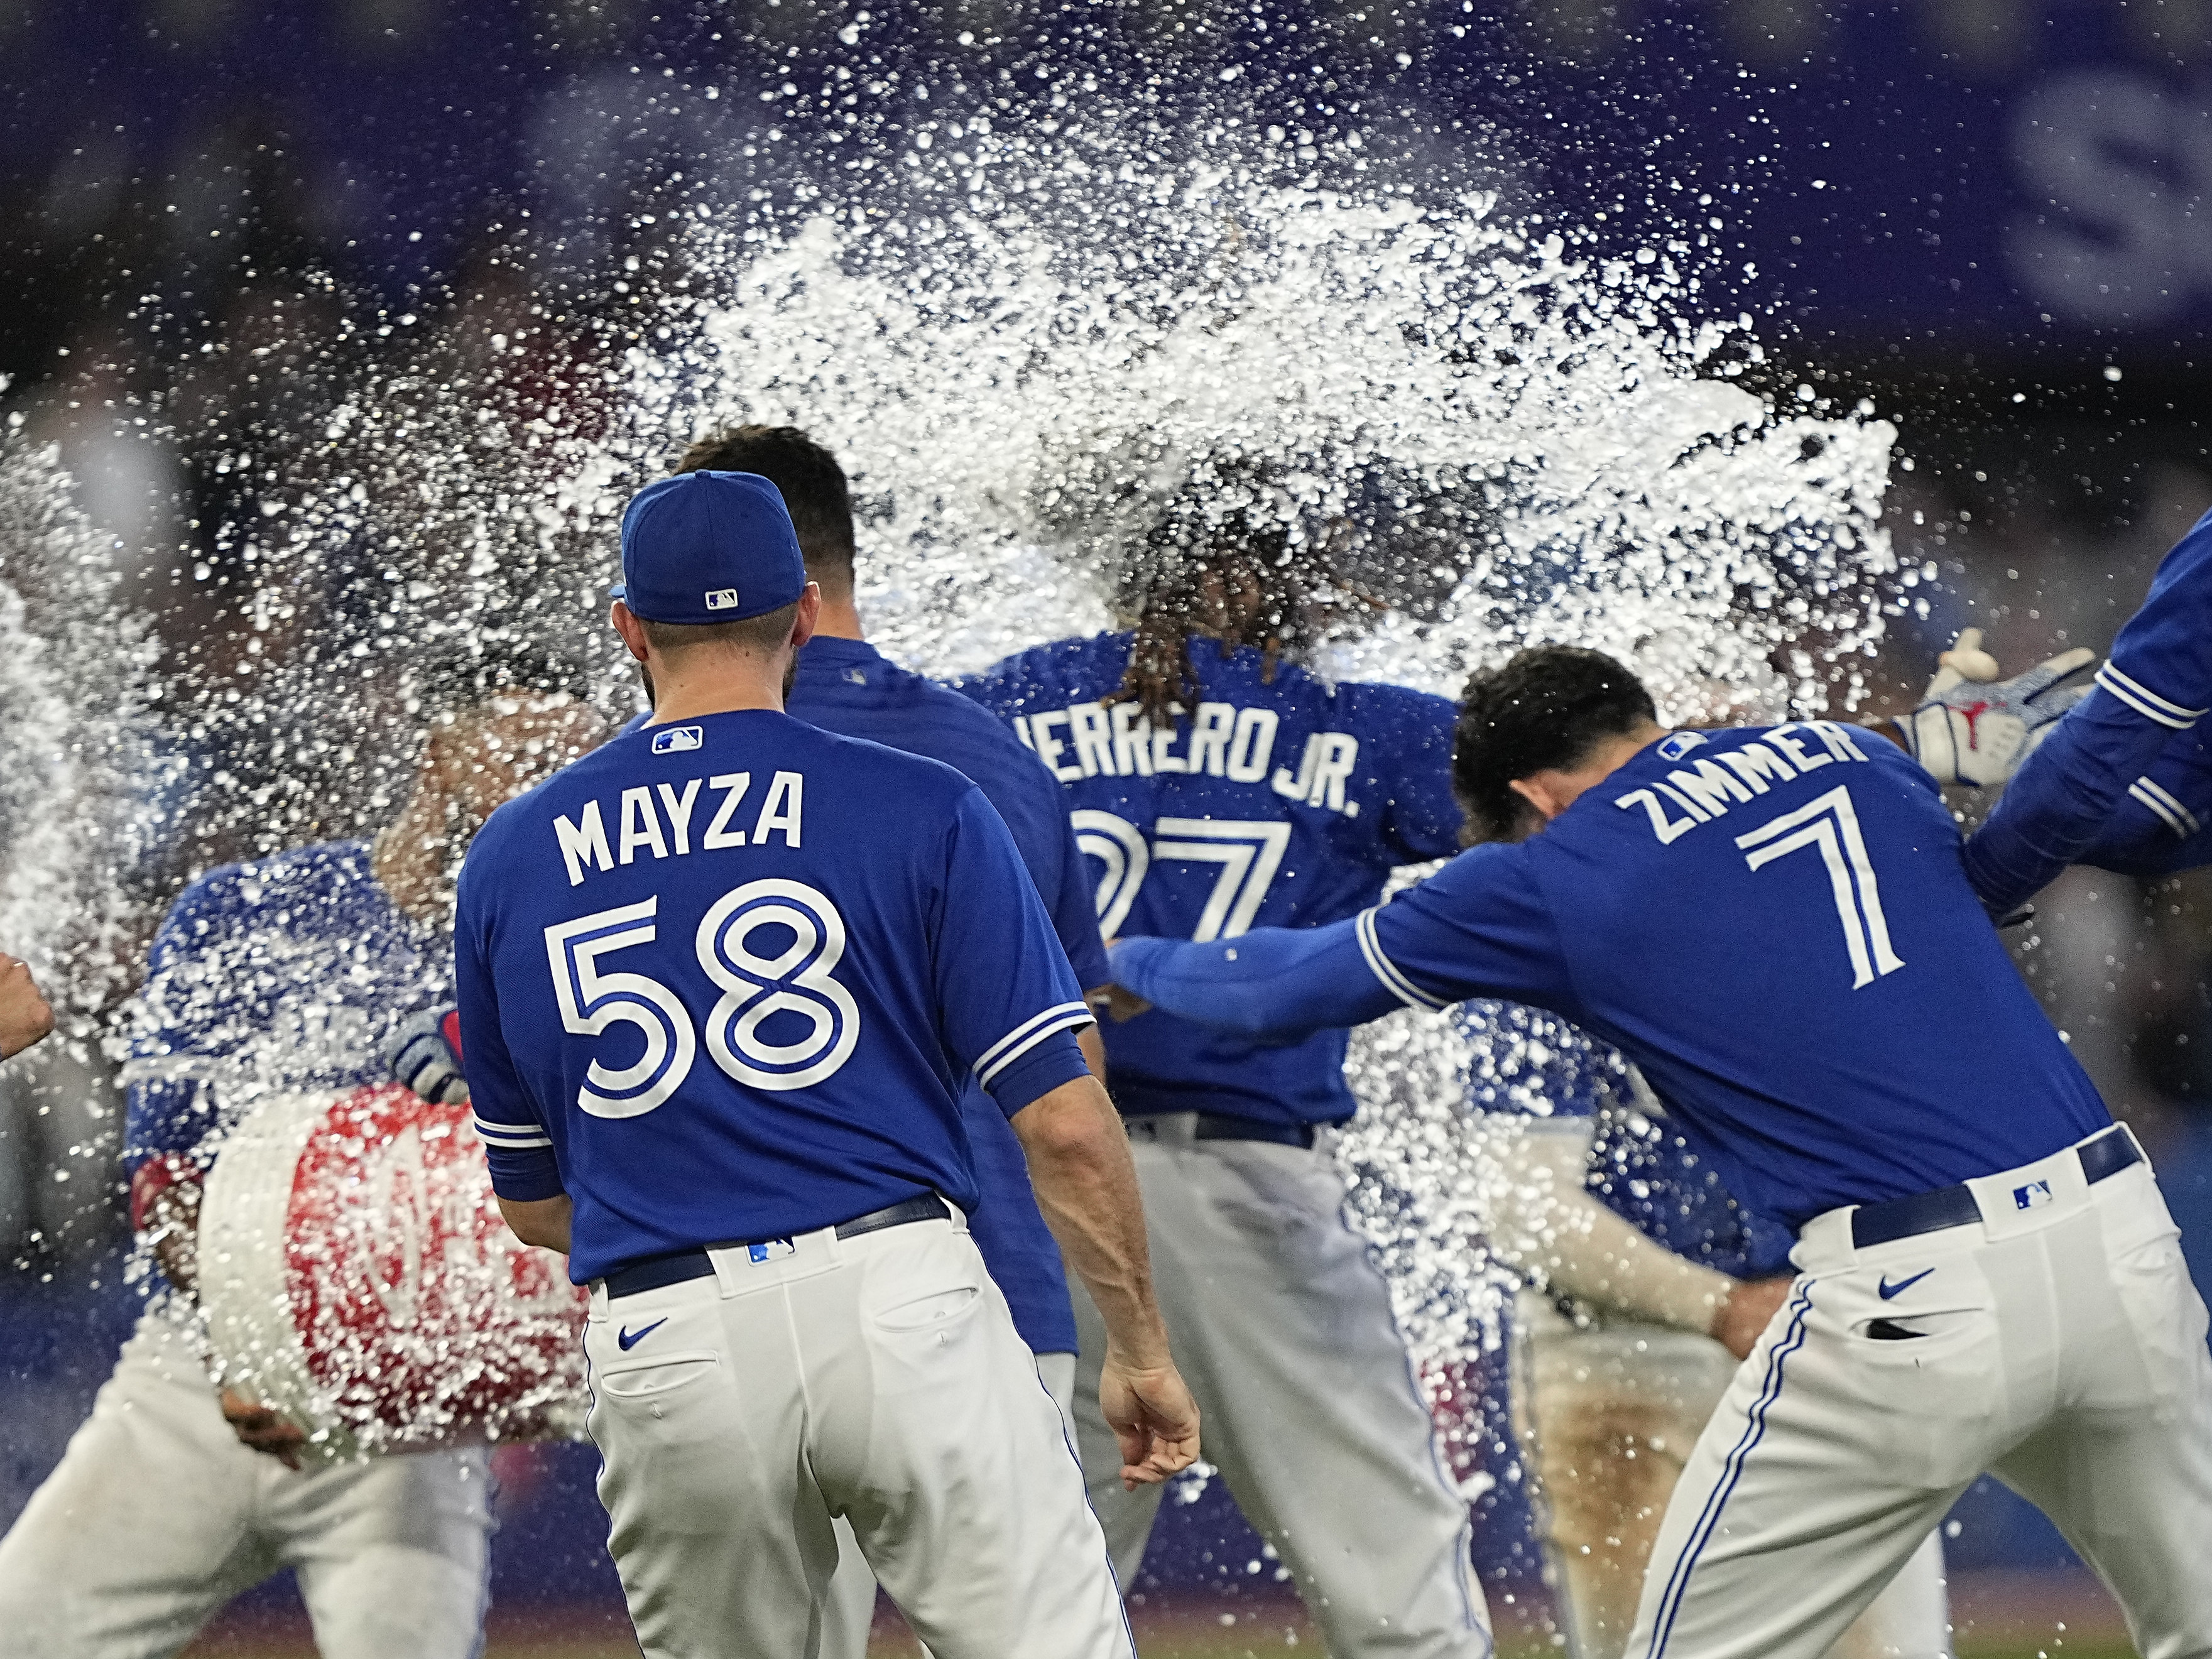 José Berríos carries no-hitter into 7th in Blue Jays' win